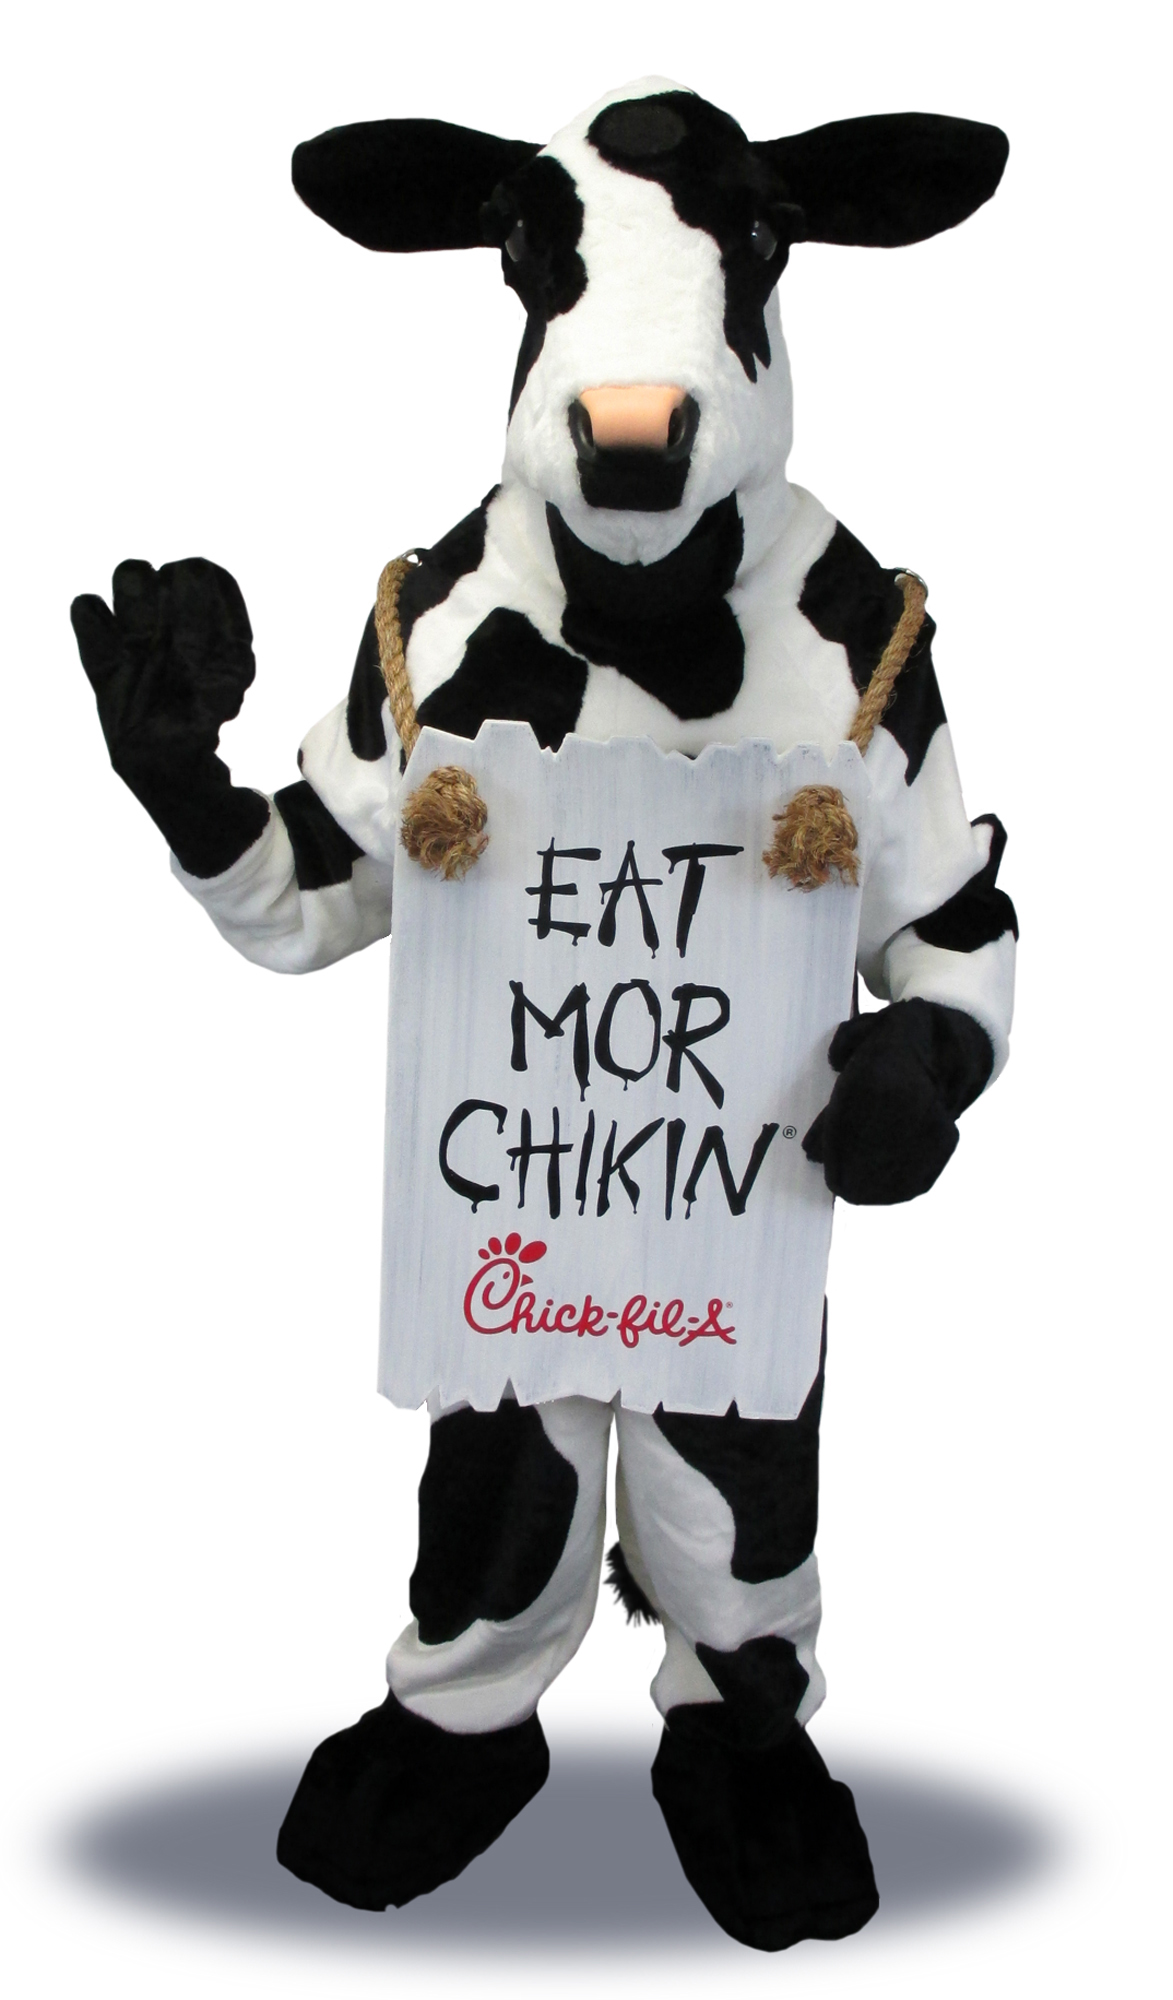 chick-fil-a-cow-clip-art-20-free-cliparts-download-images-on